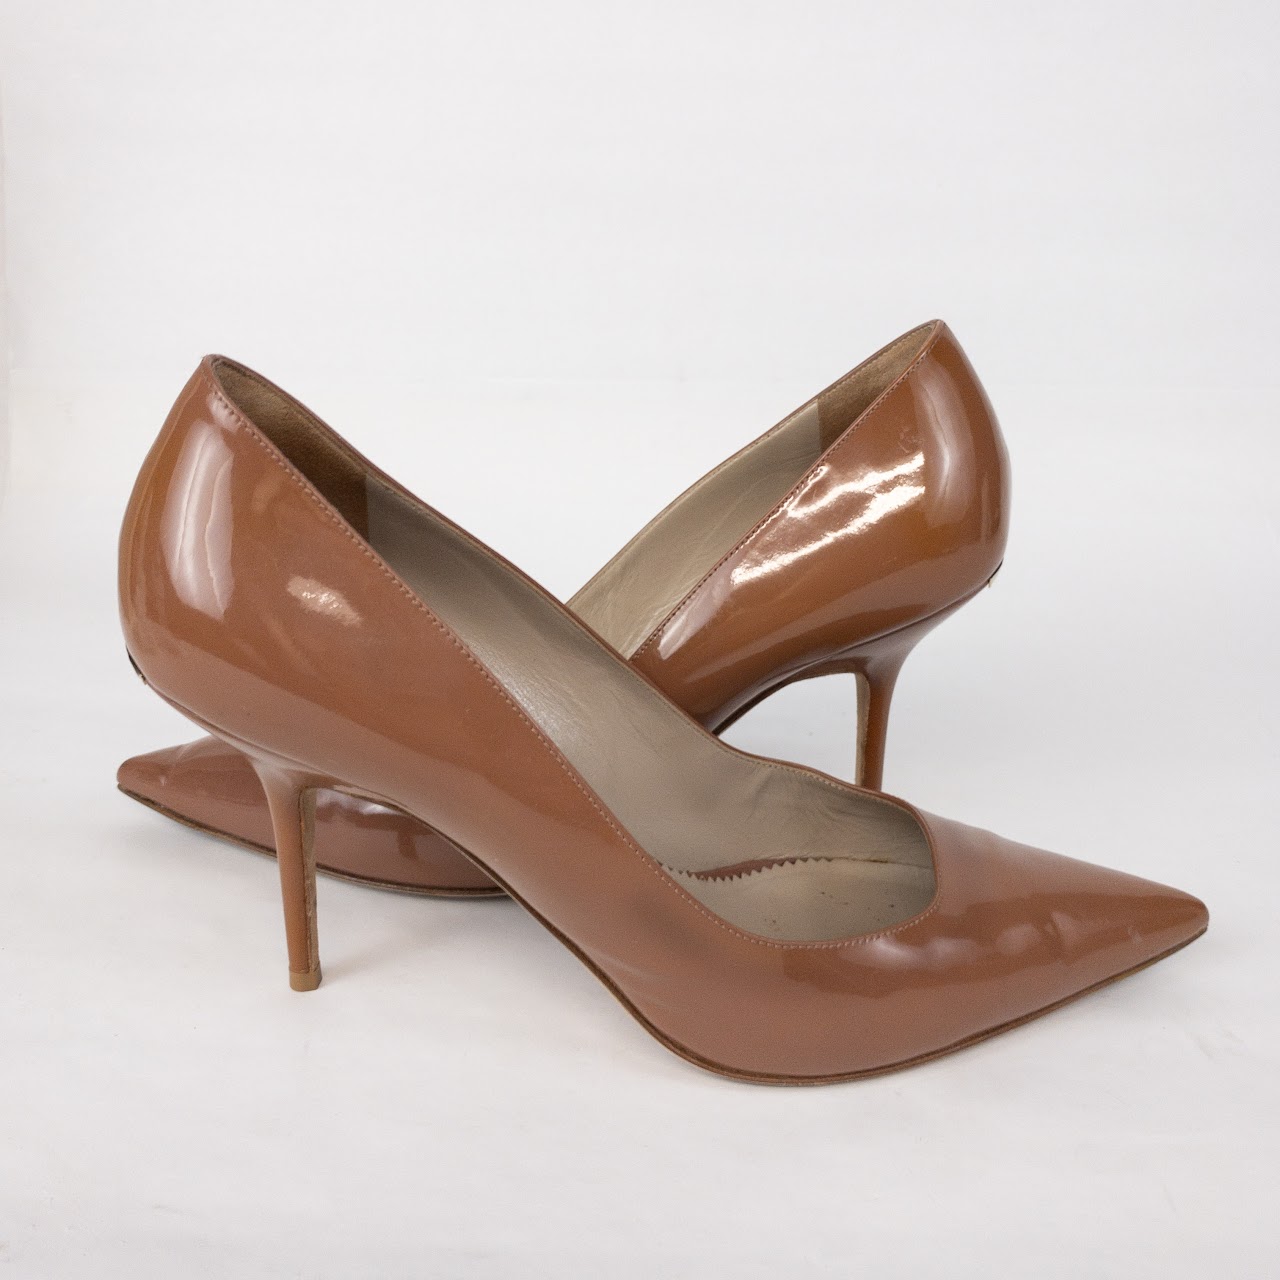 Burberry Patent Leather Rosewood Pumps